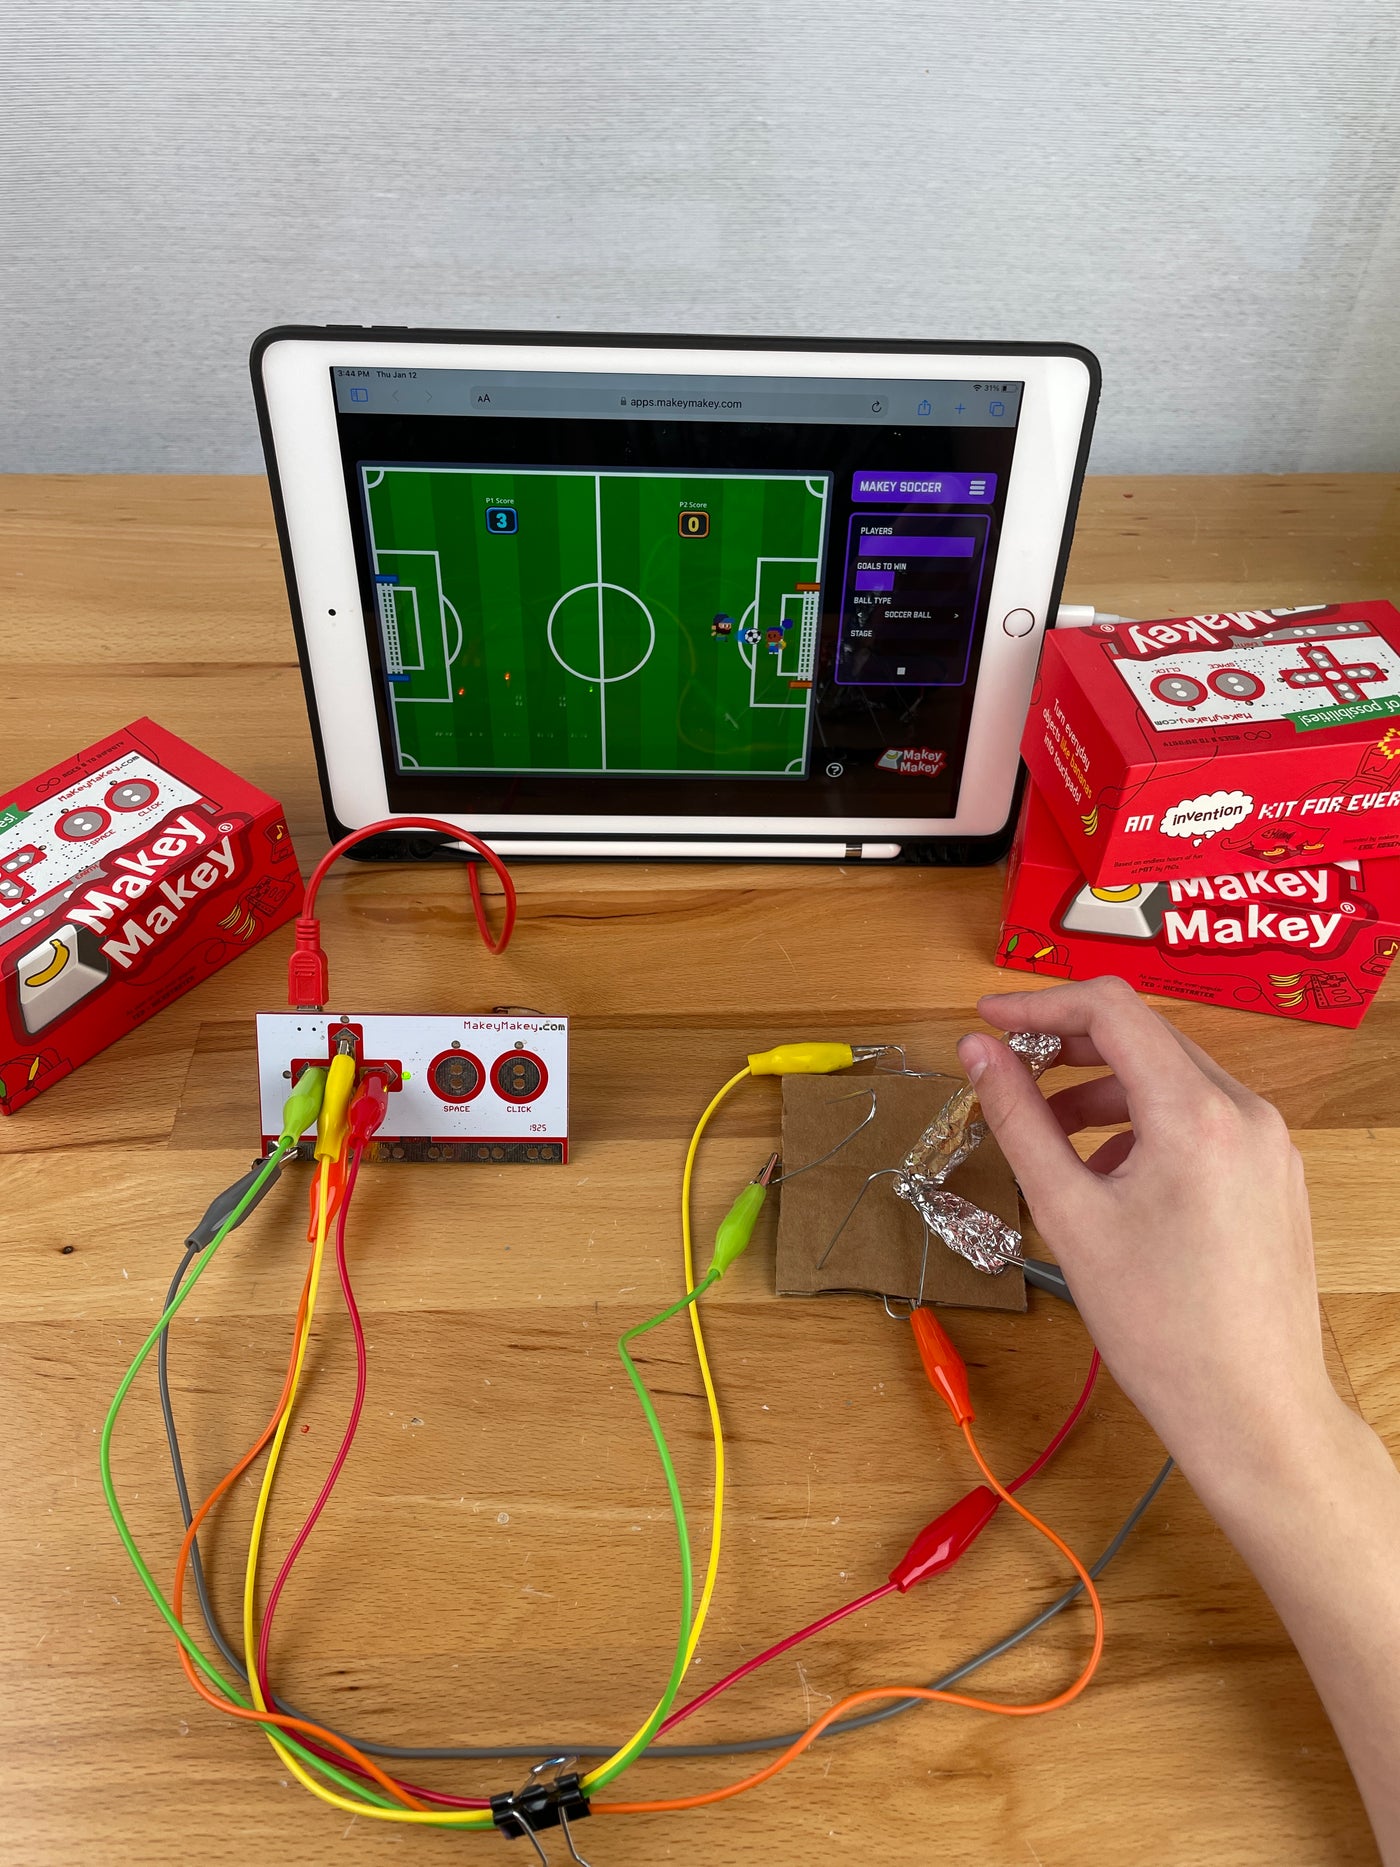 Invention Literacy Foundations: Prototype Game Controller for Makey Makey Soccer App